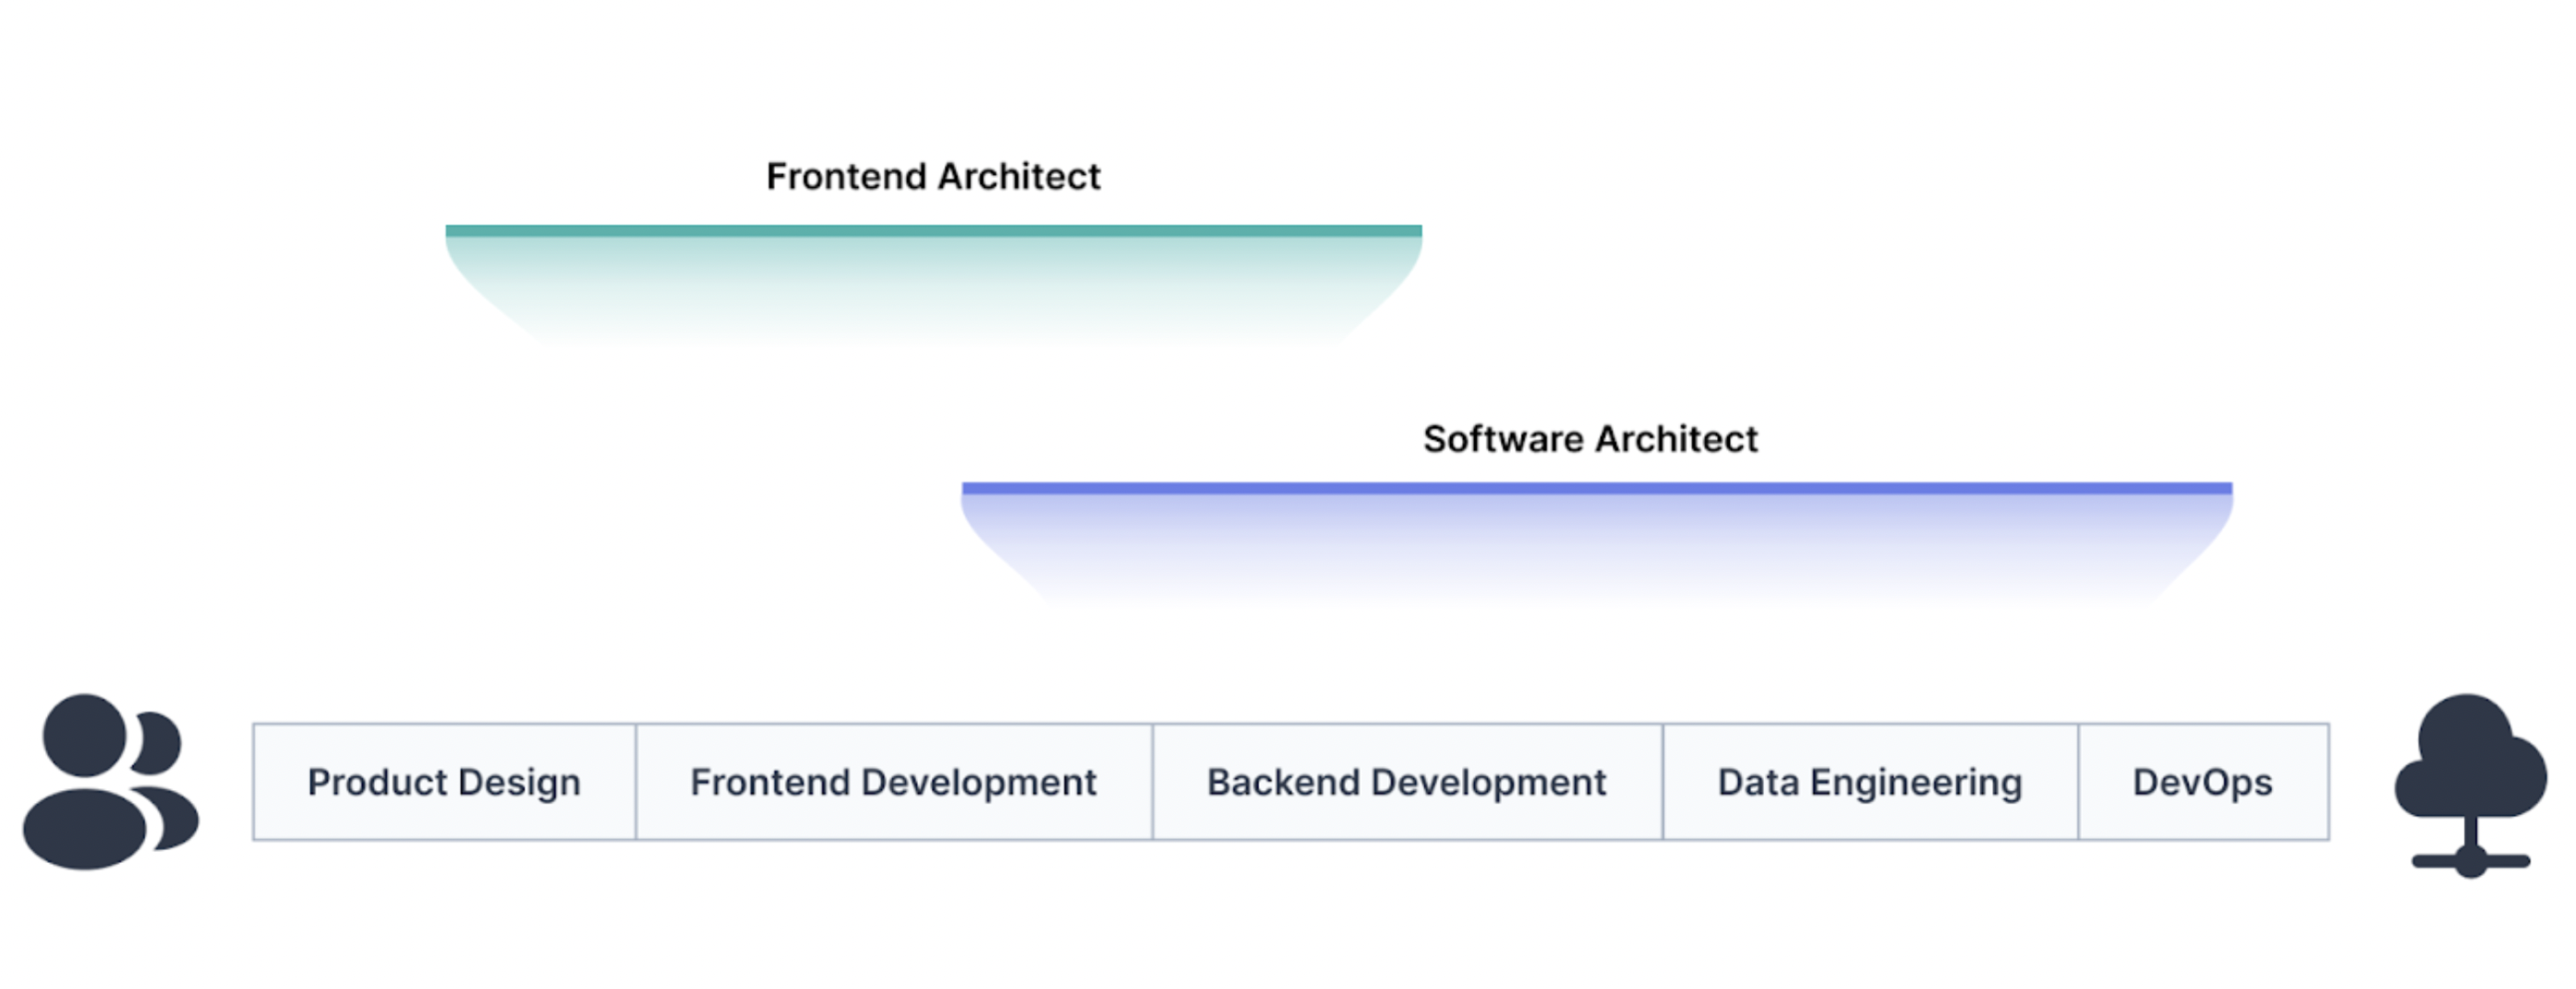 Front-end architects operate closer to end users compared to generalist software architects